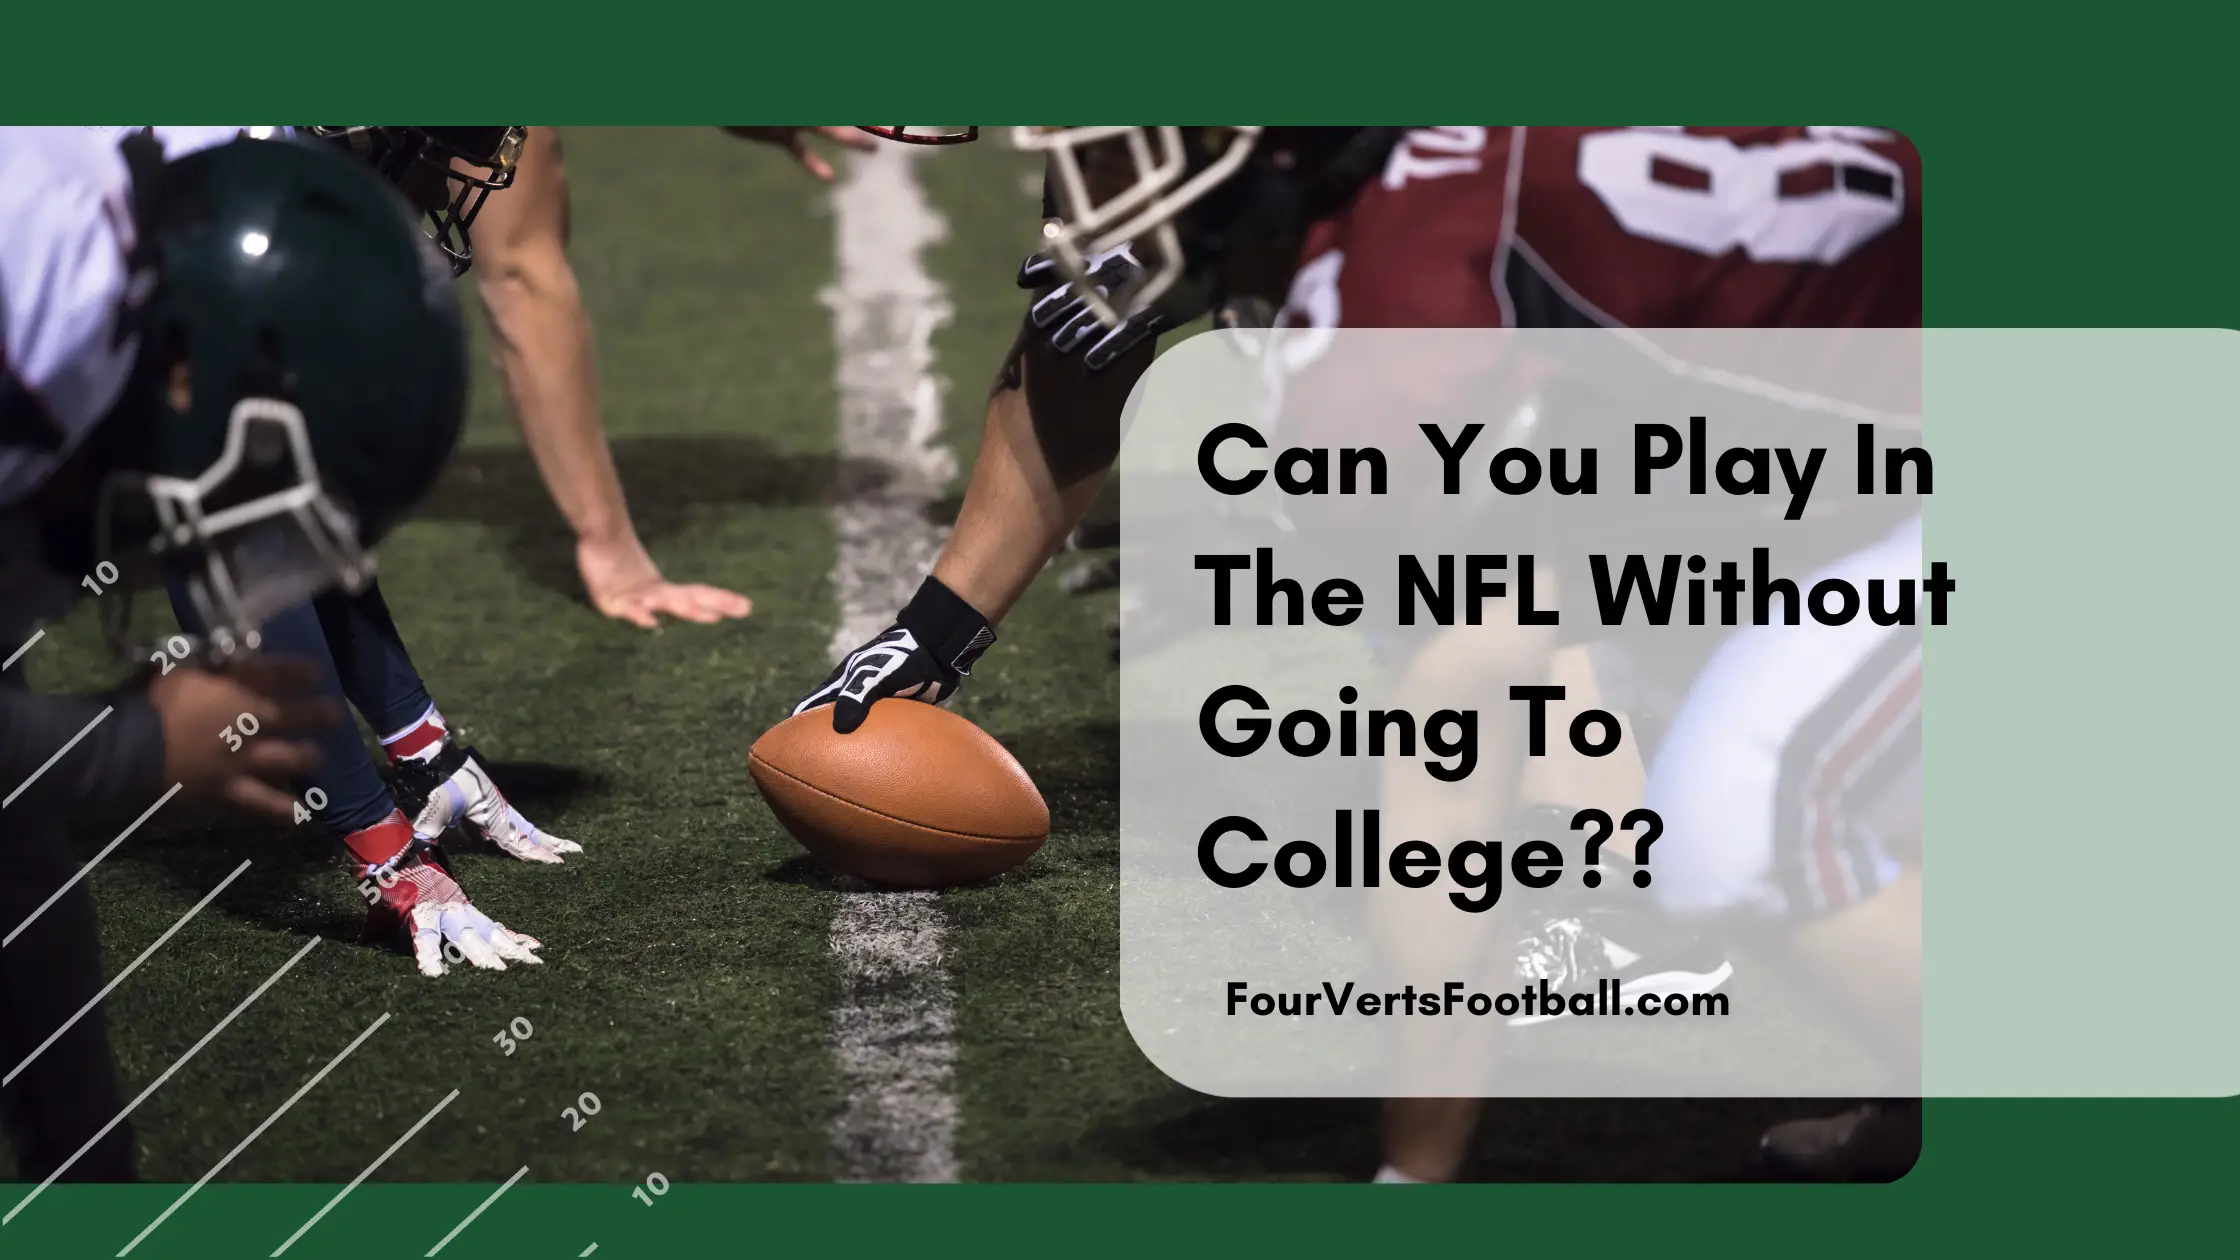 Can You Play In The NFL Without Going To College?